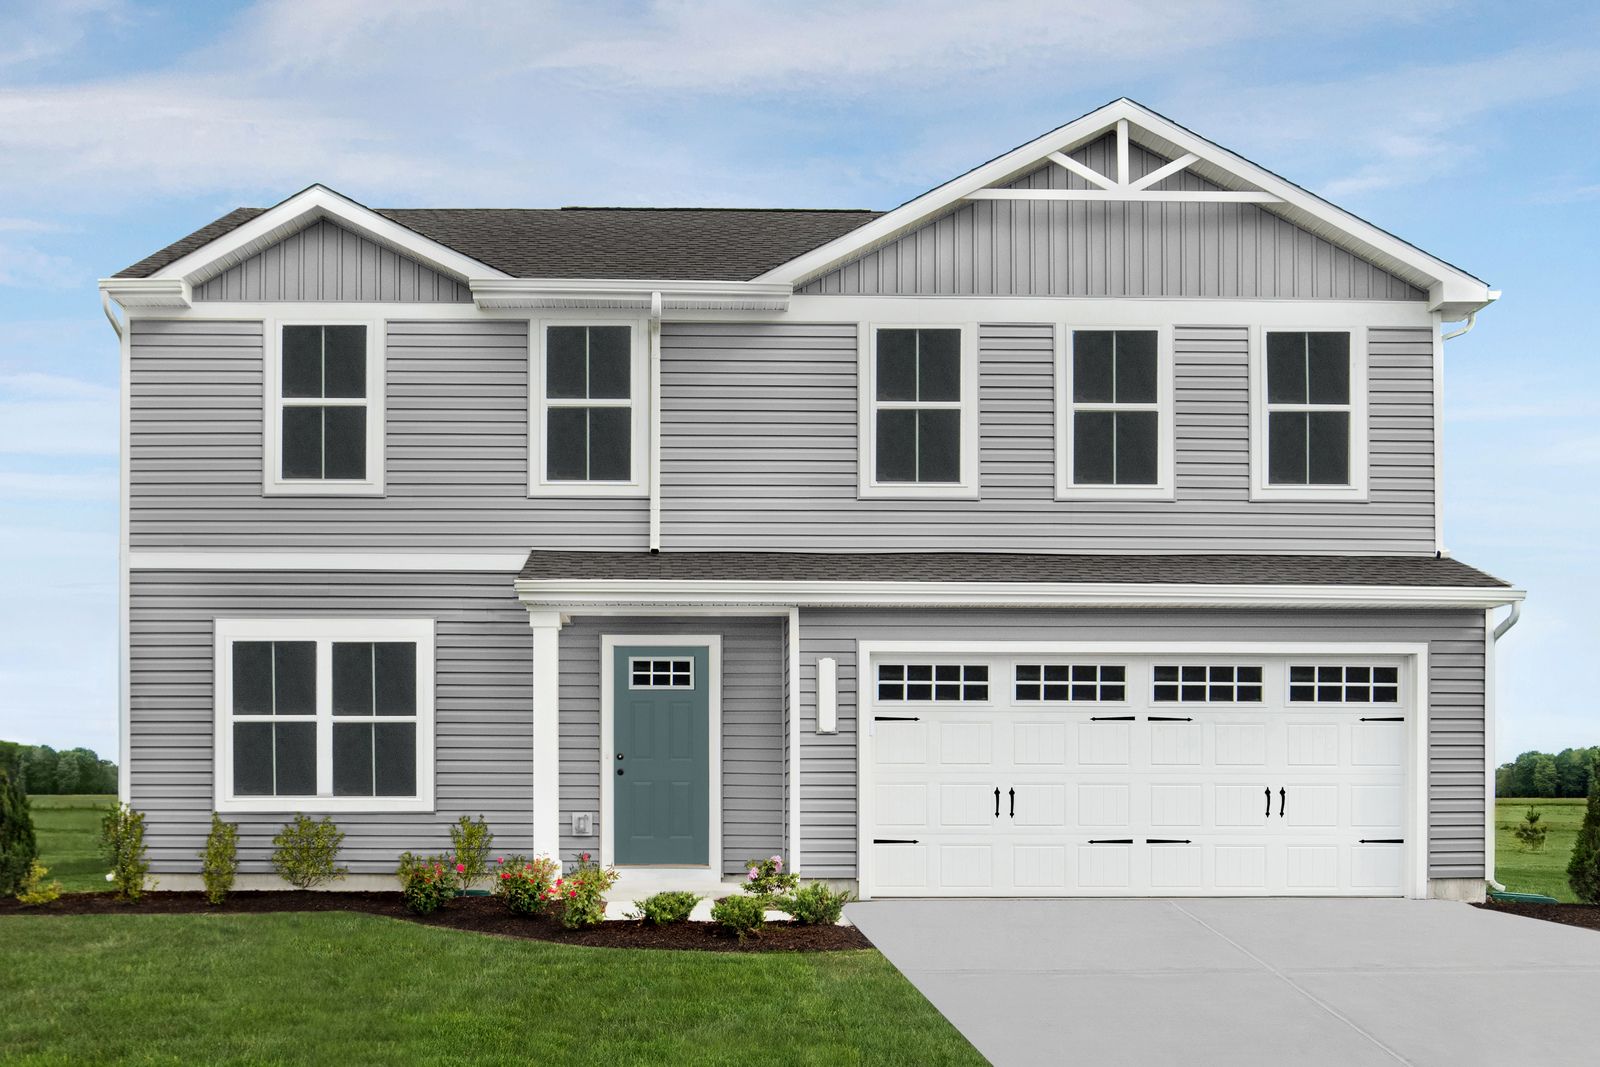 Final homesites are released at this highly sought after community!